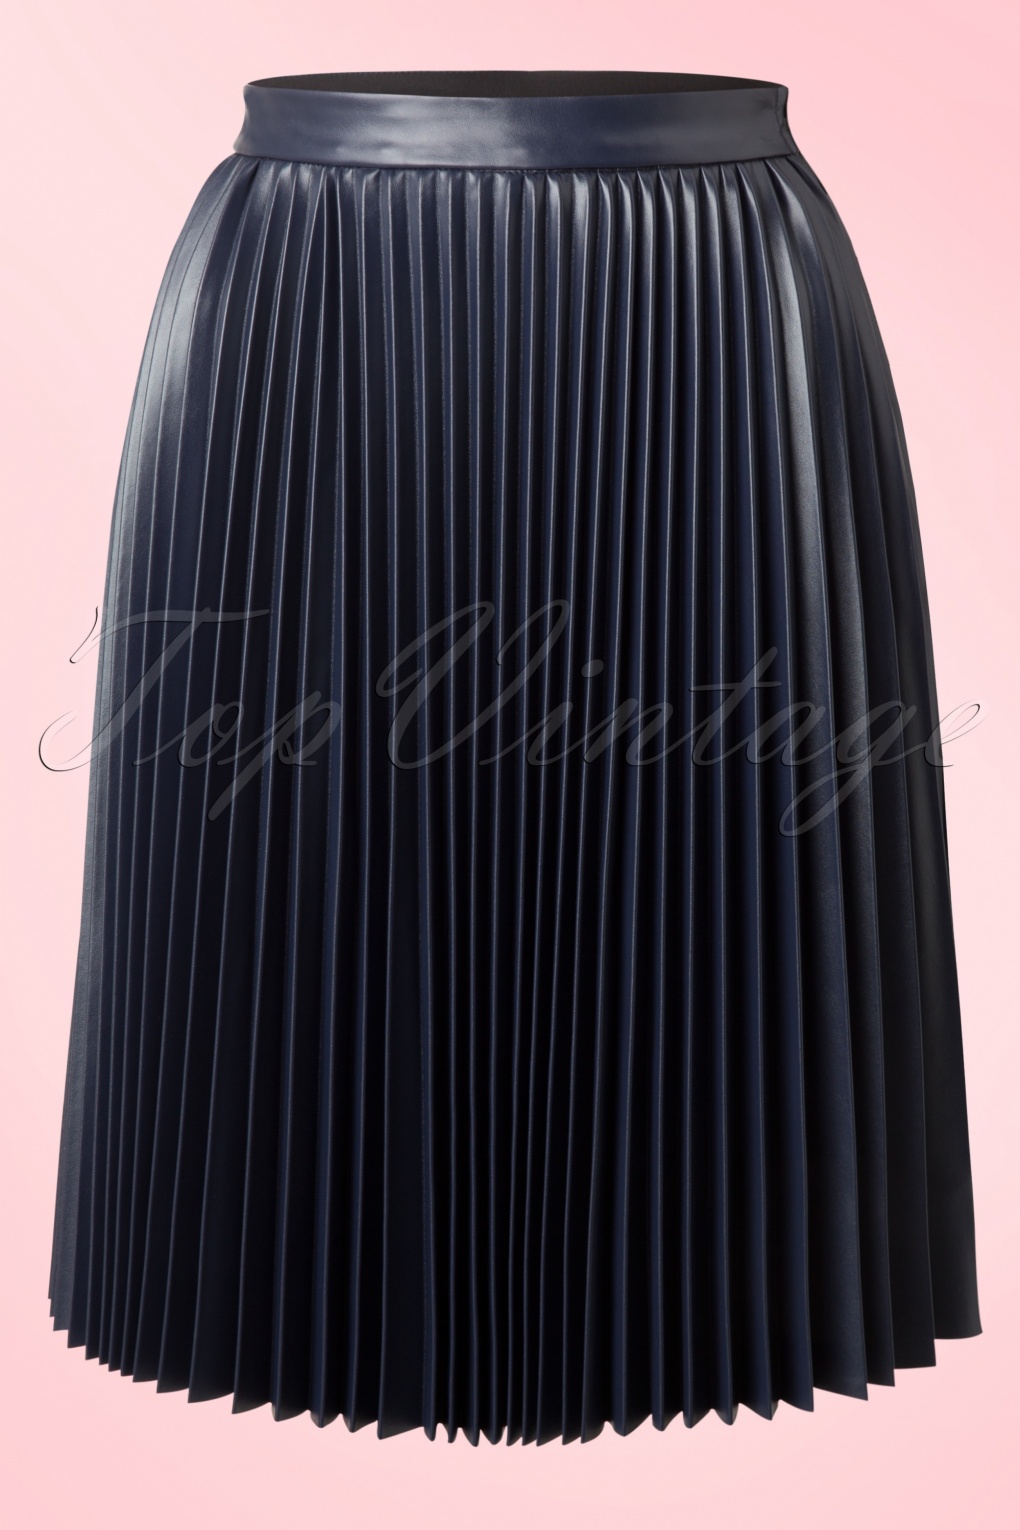 50s Gracie Skirt in Navy Faux Leather